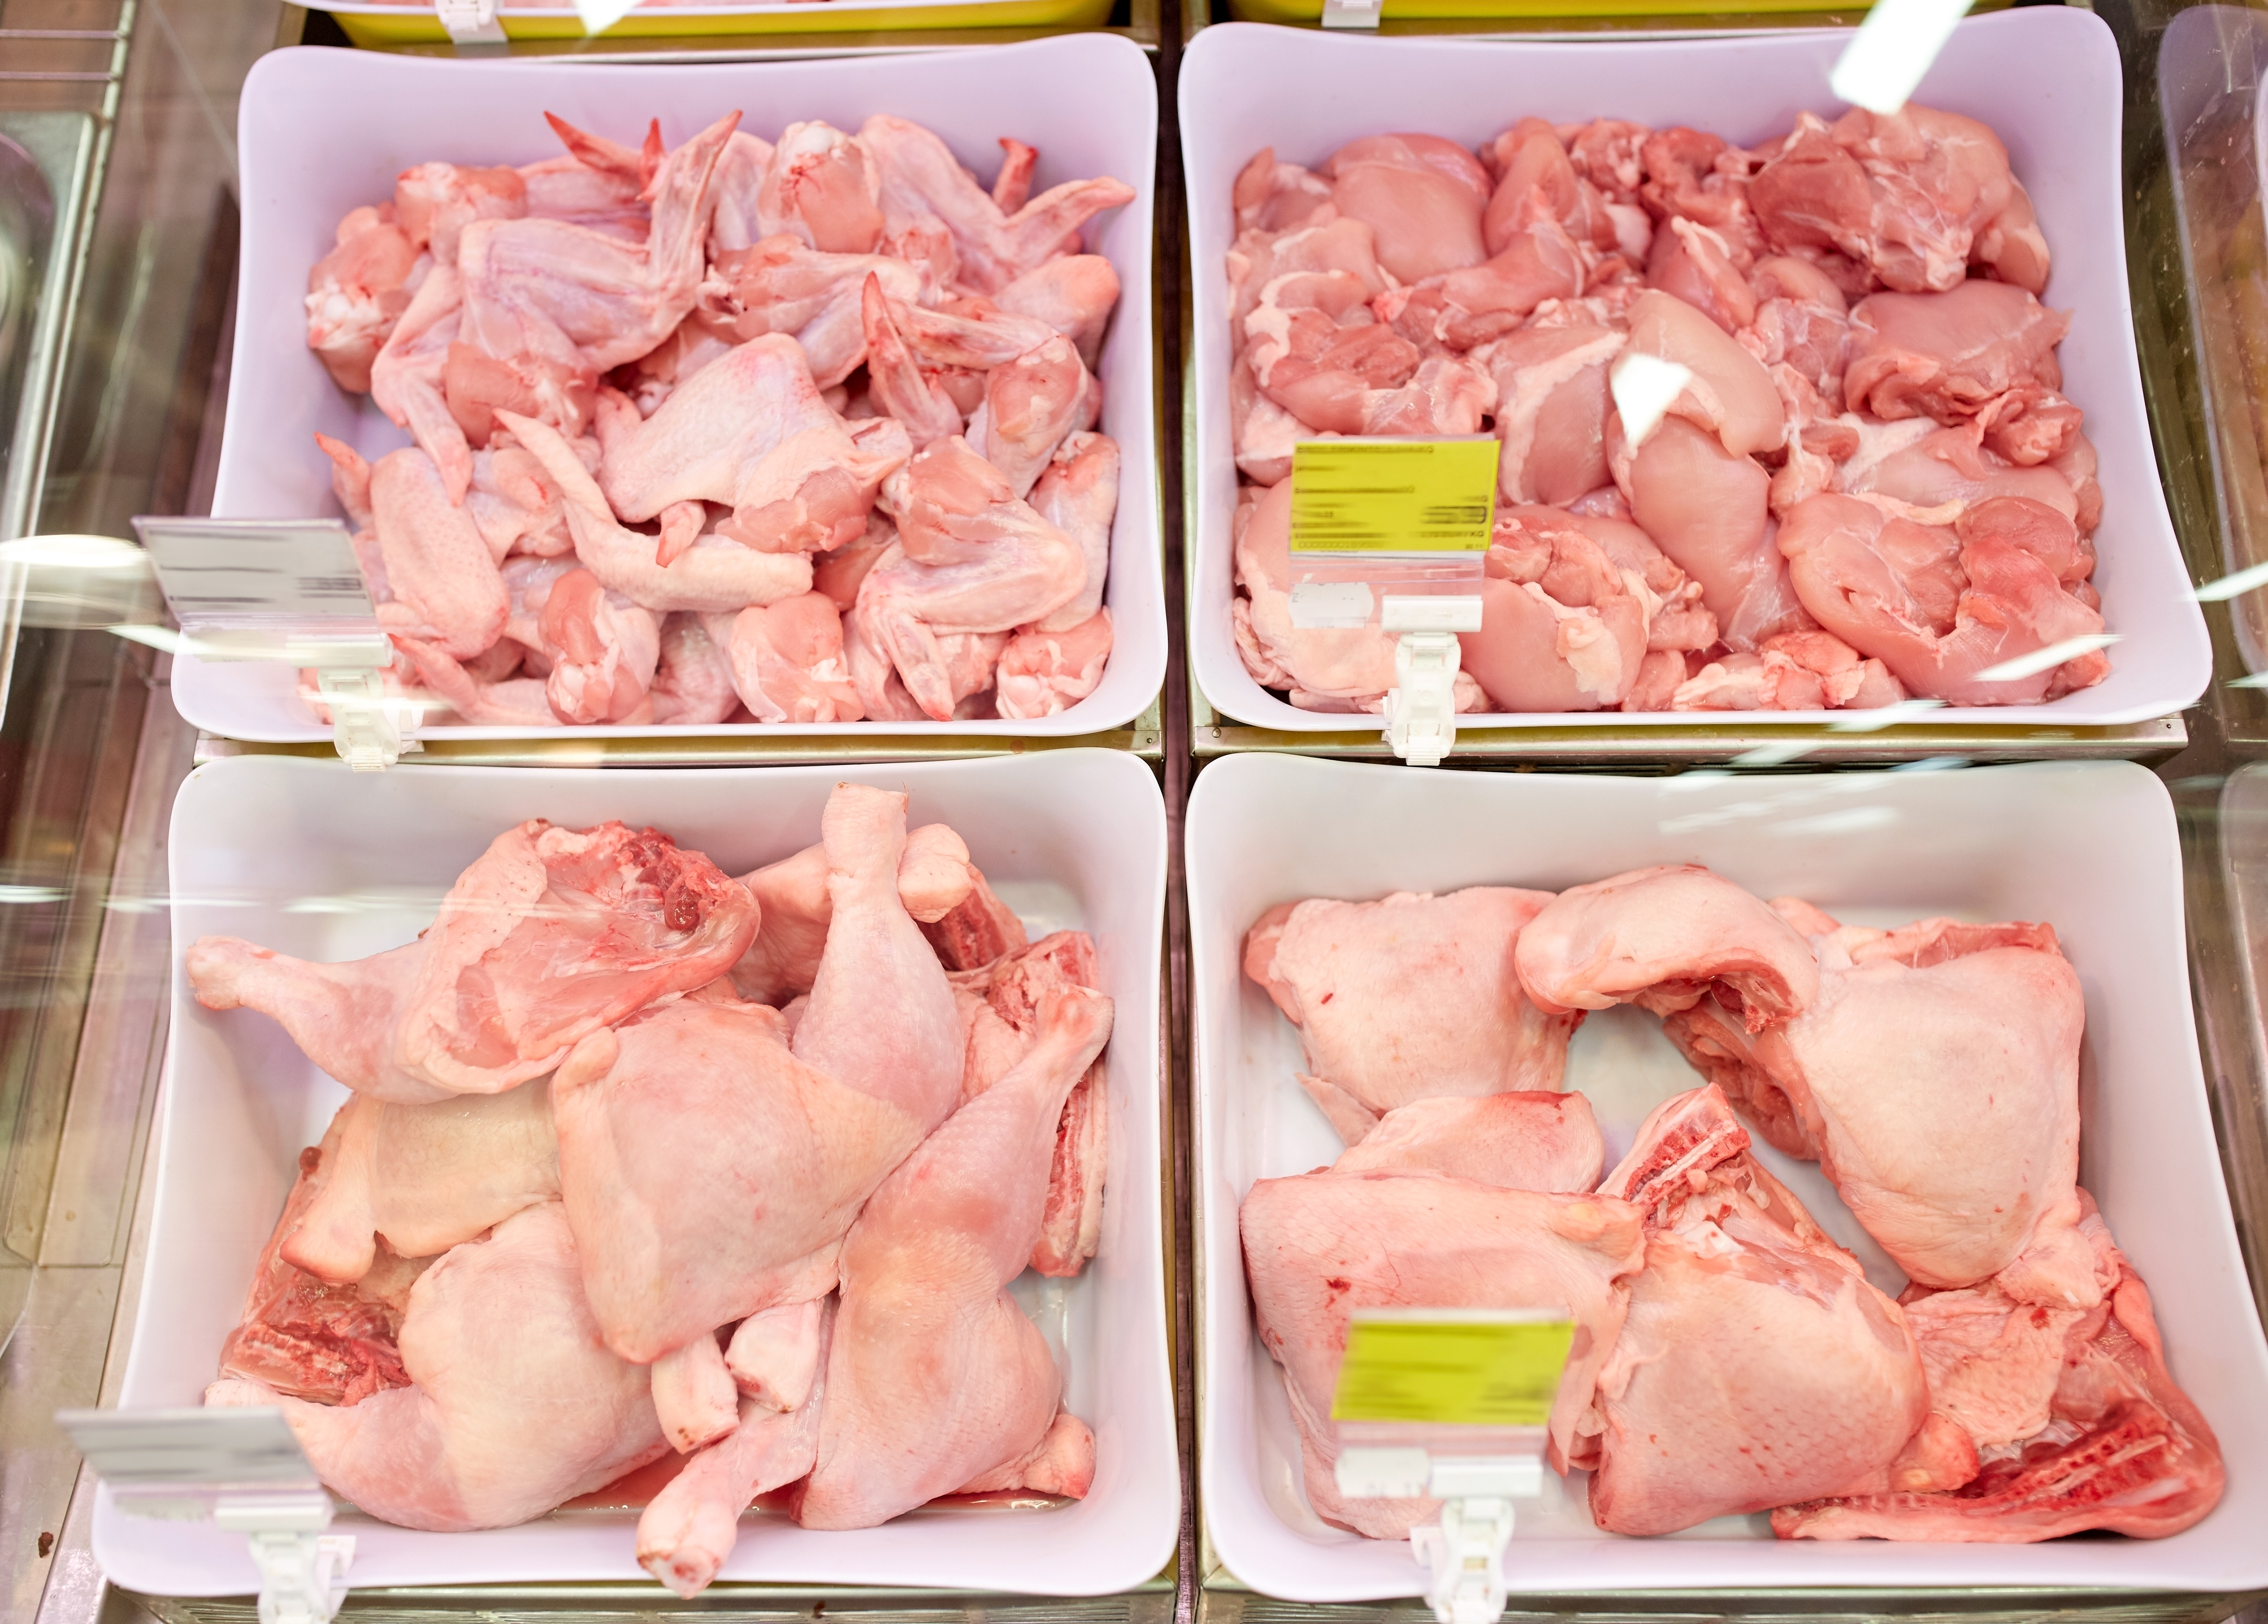 poultry-meat-in-bowls-at-grocery-stall-2022-12-16-09-36-48-utc